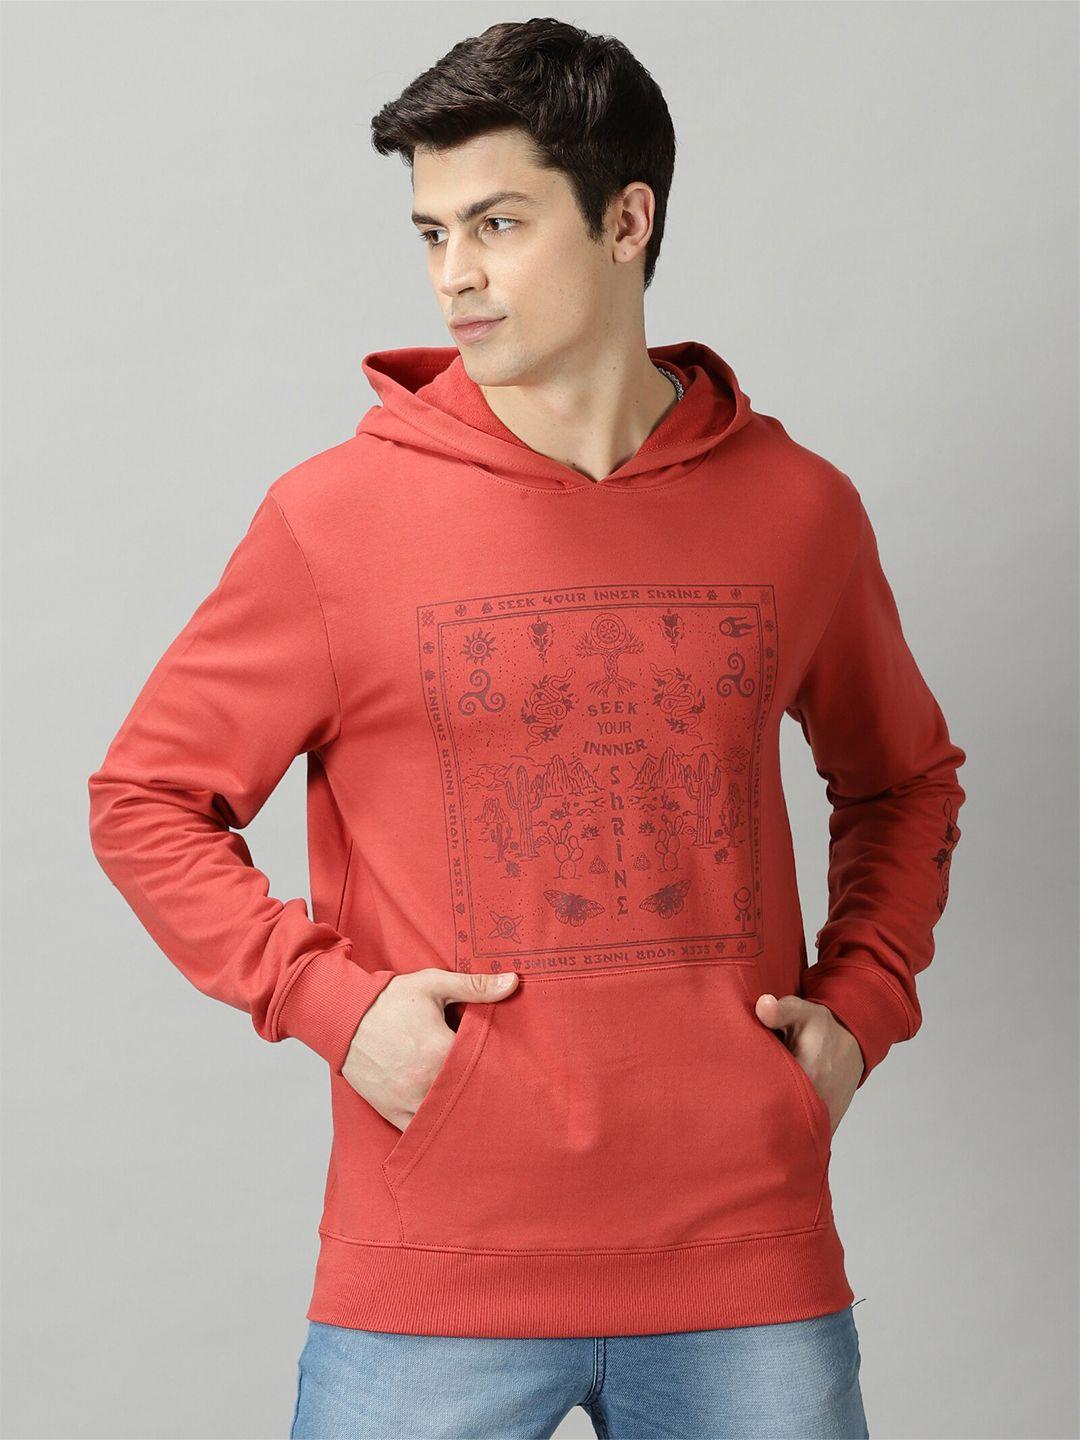 the hollander graphic printed hooded regular fit cotton casual t-shirt